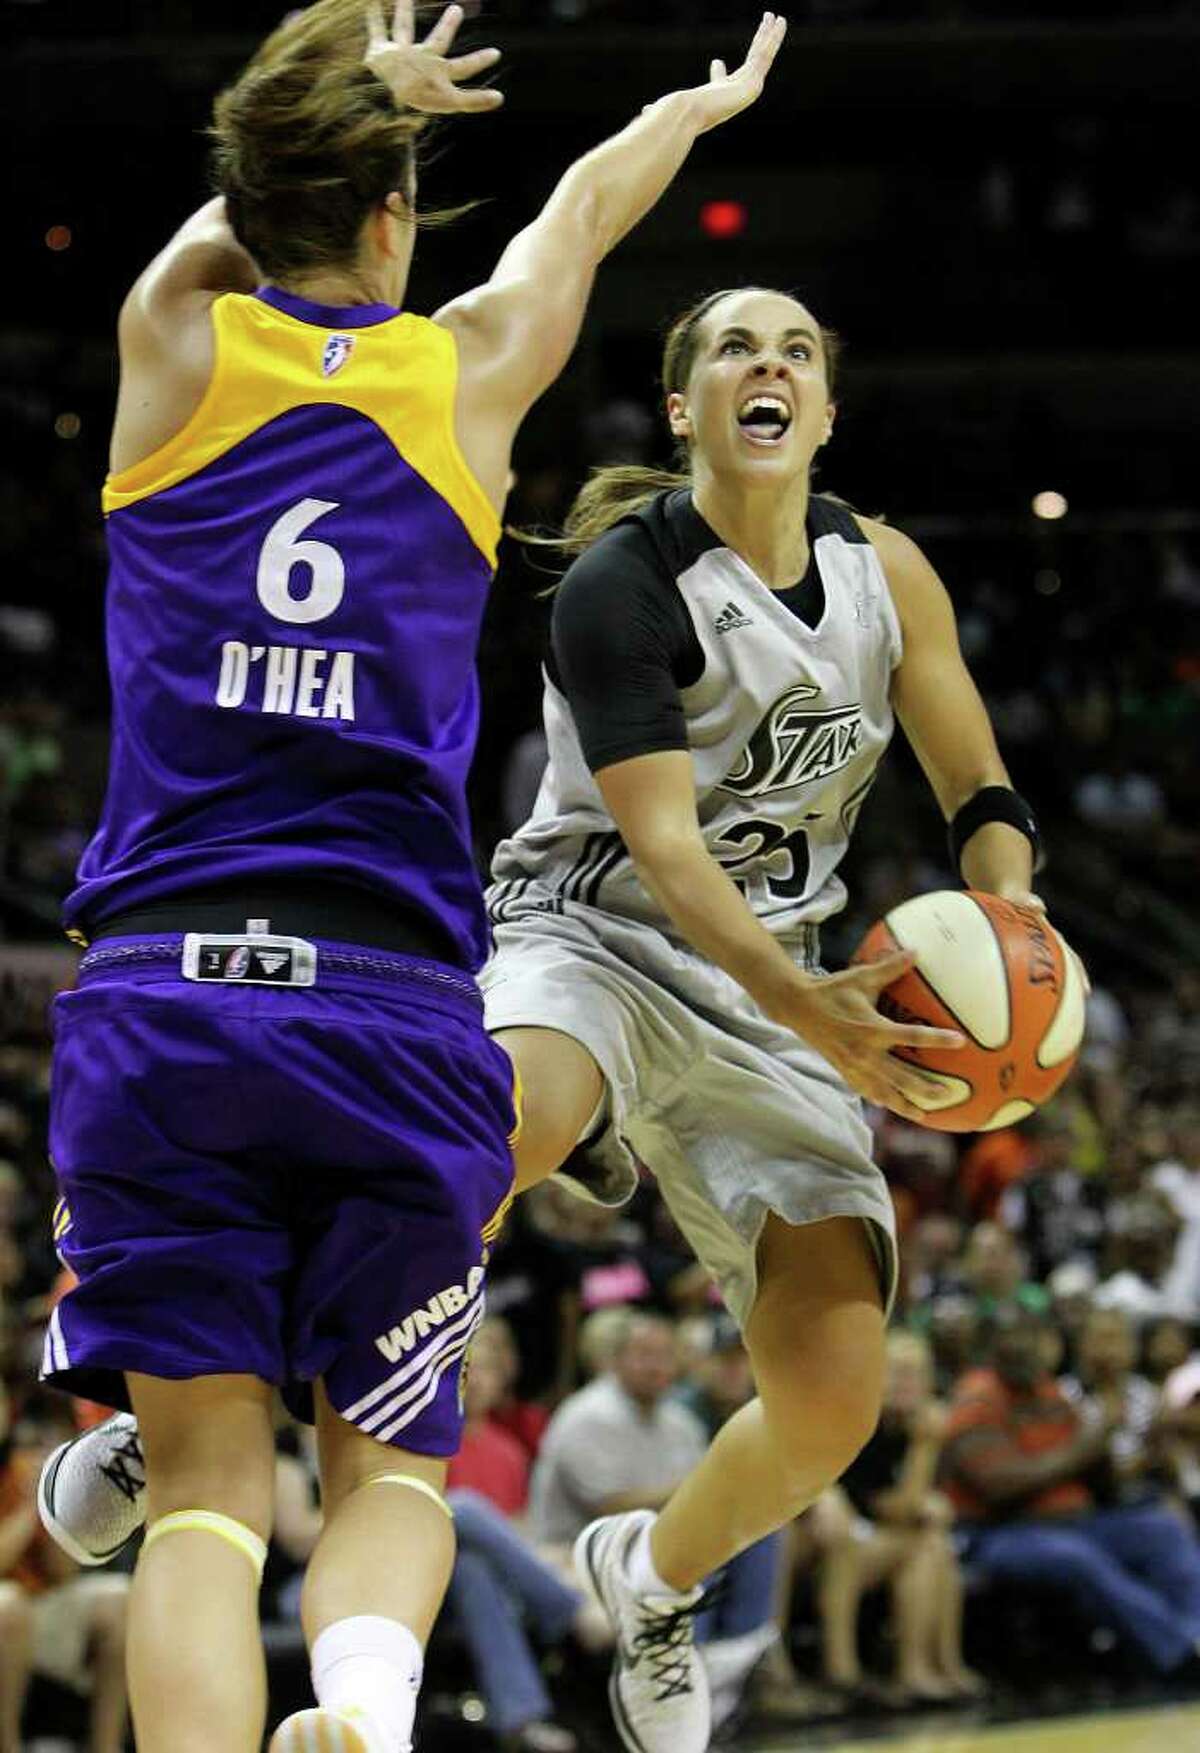 Silver Stars' Becky Hammon (right) goes to the basket against Los Angeles Sparks' Jenna O'Hea (06) in the second half at the AT&T Center on Friday, June 24, 2011. Hammon scored 22 points as the Silver Stars defeated the Sparks, 90-80, in overtime. Kin Man Hui/kmhui@express-news.net